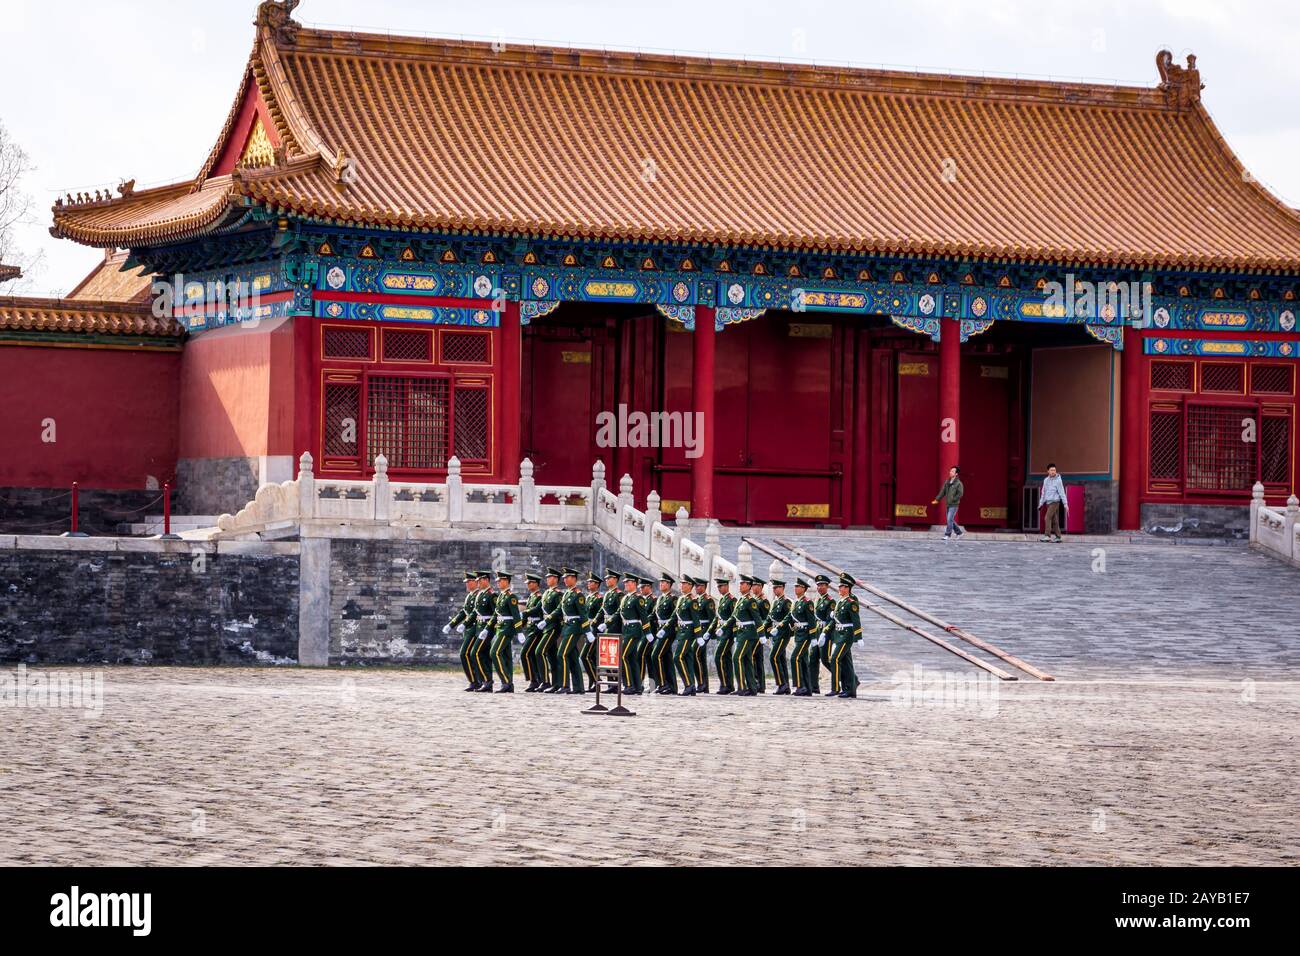 Changing of the guard at Forbidden City, soldiers marching in a formation Stock Photo